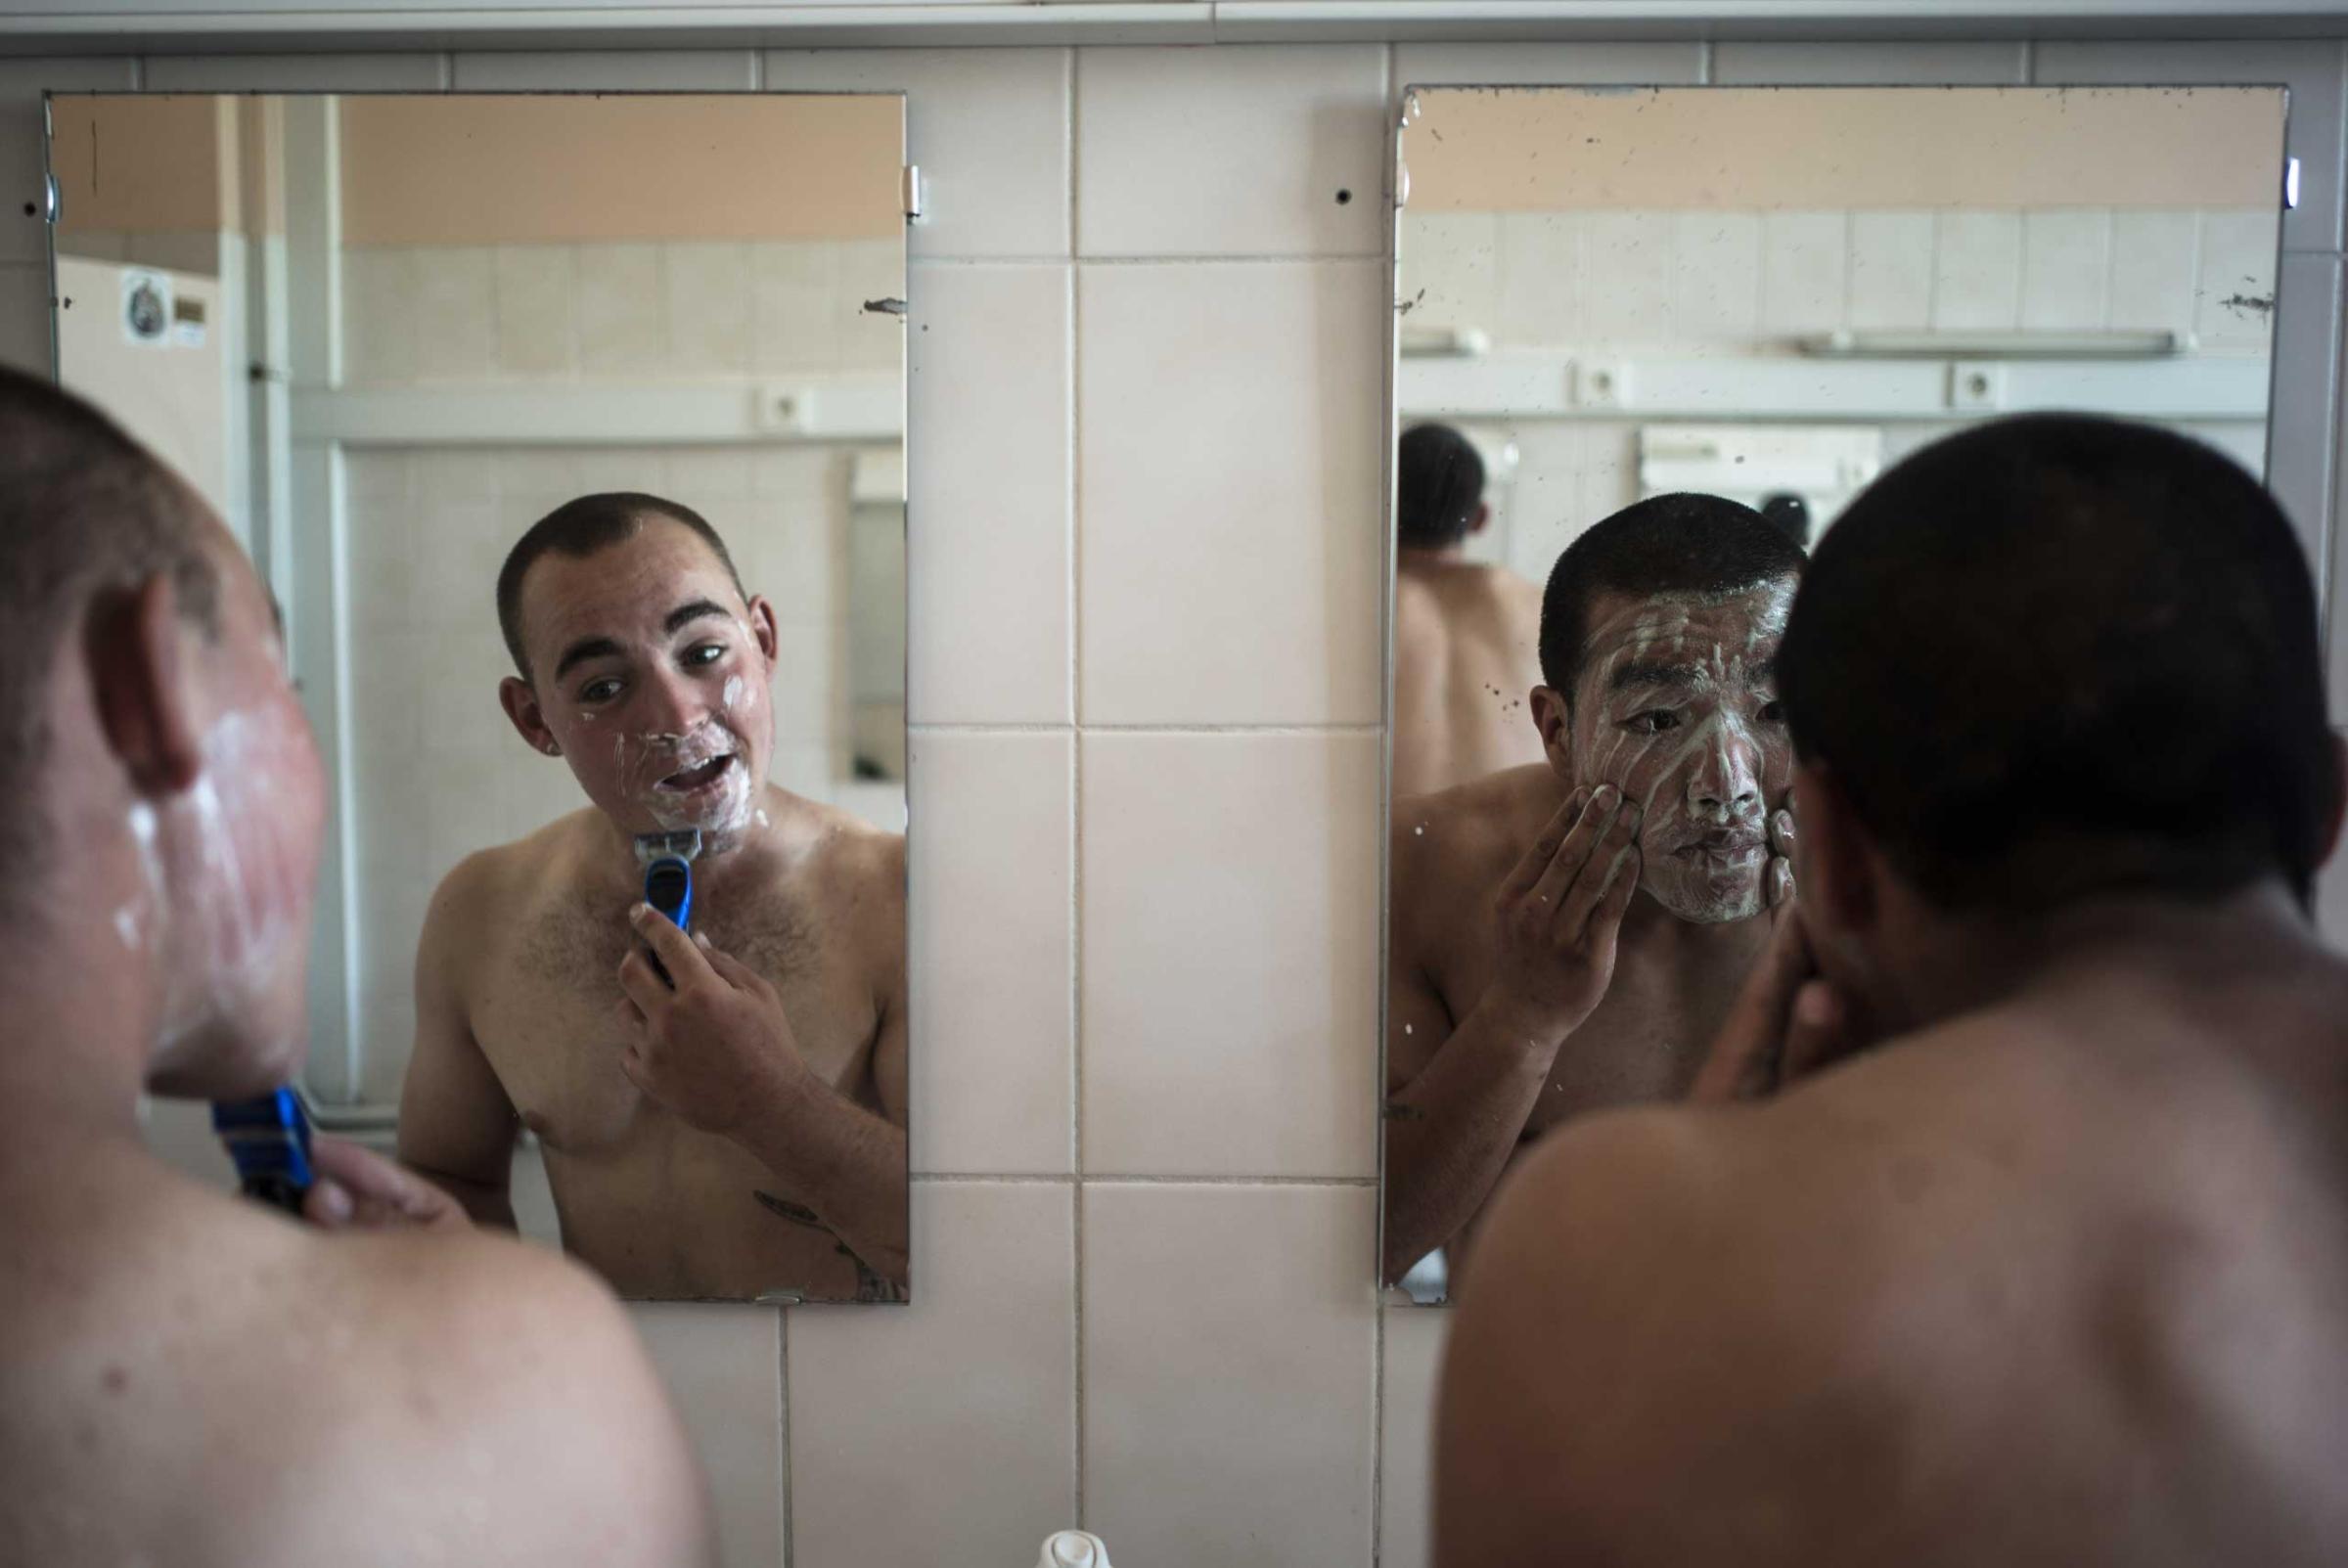 Two members of the French Foreign Legion shave. Nimes, France. Aug. 7, 2015